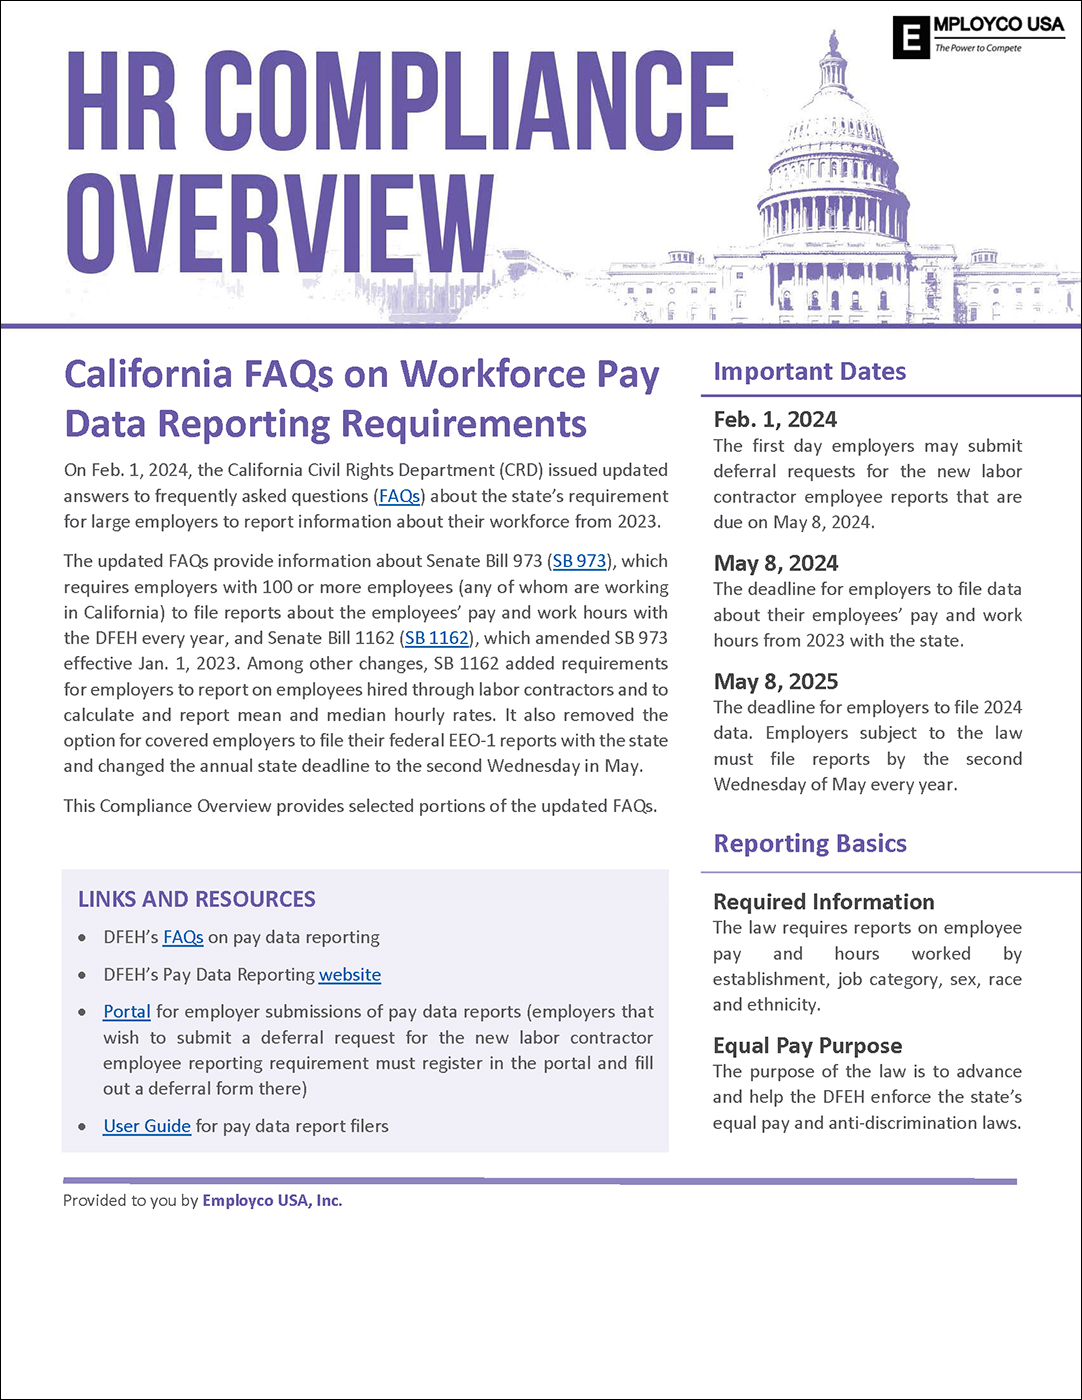 California HR Compliance Overview